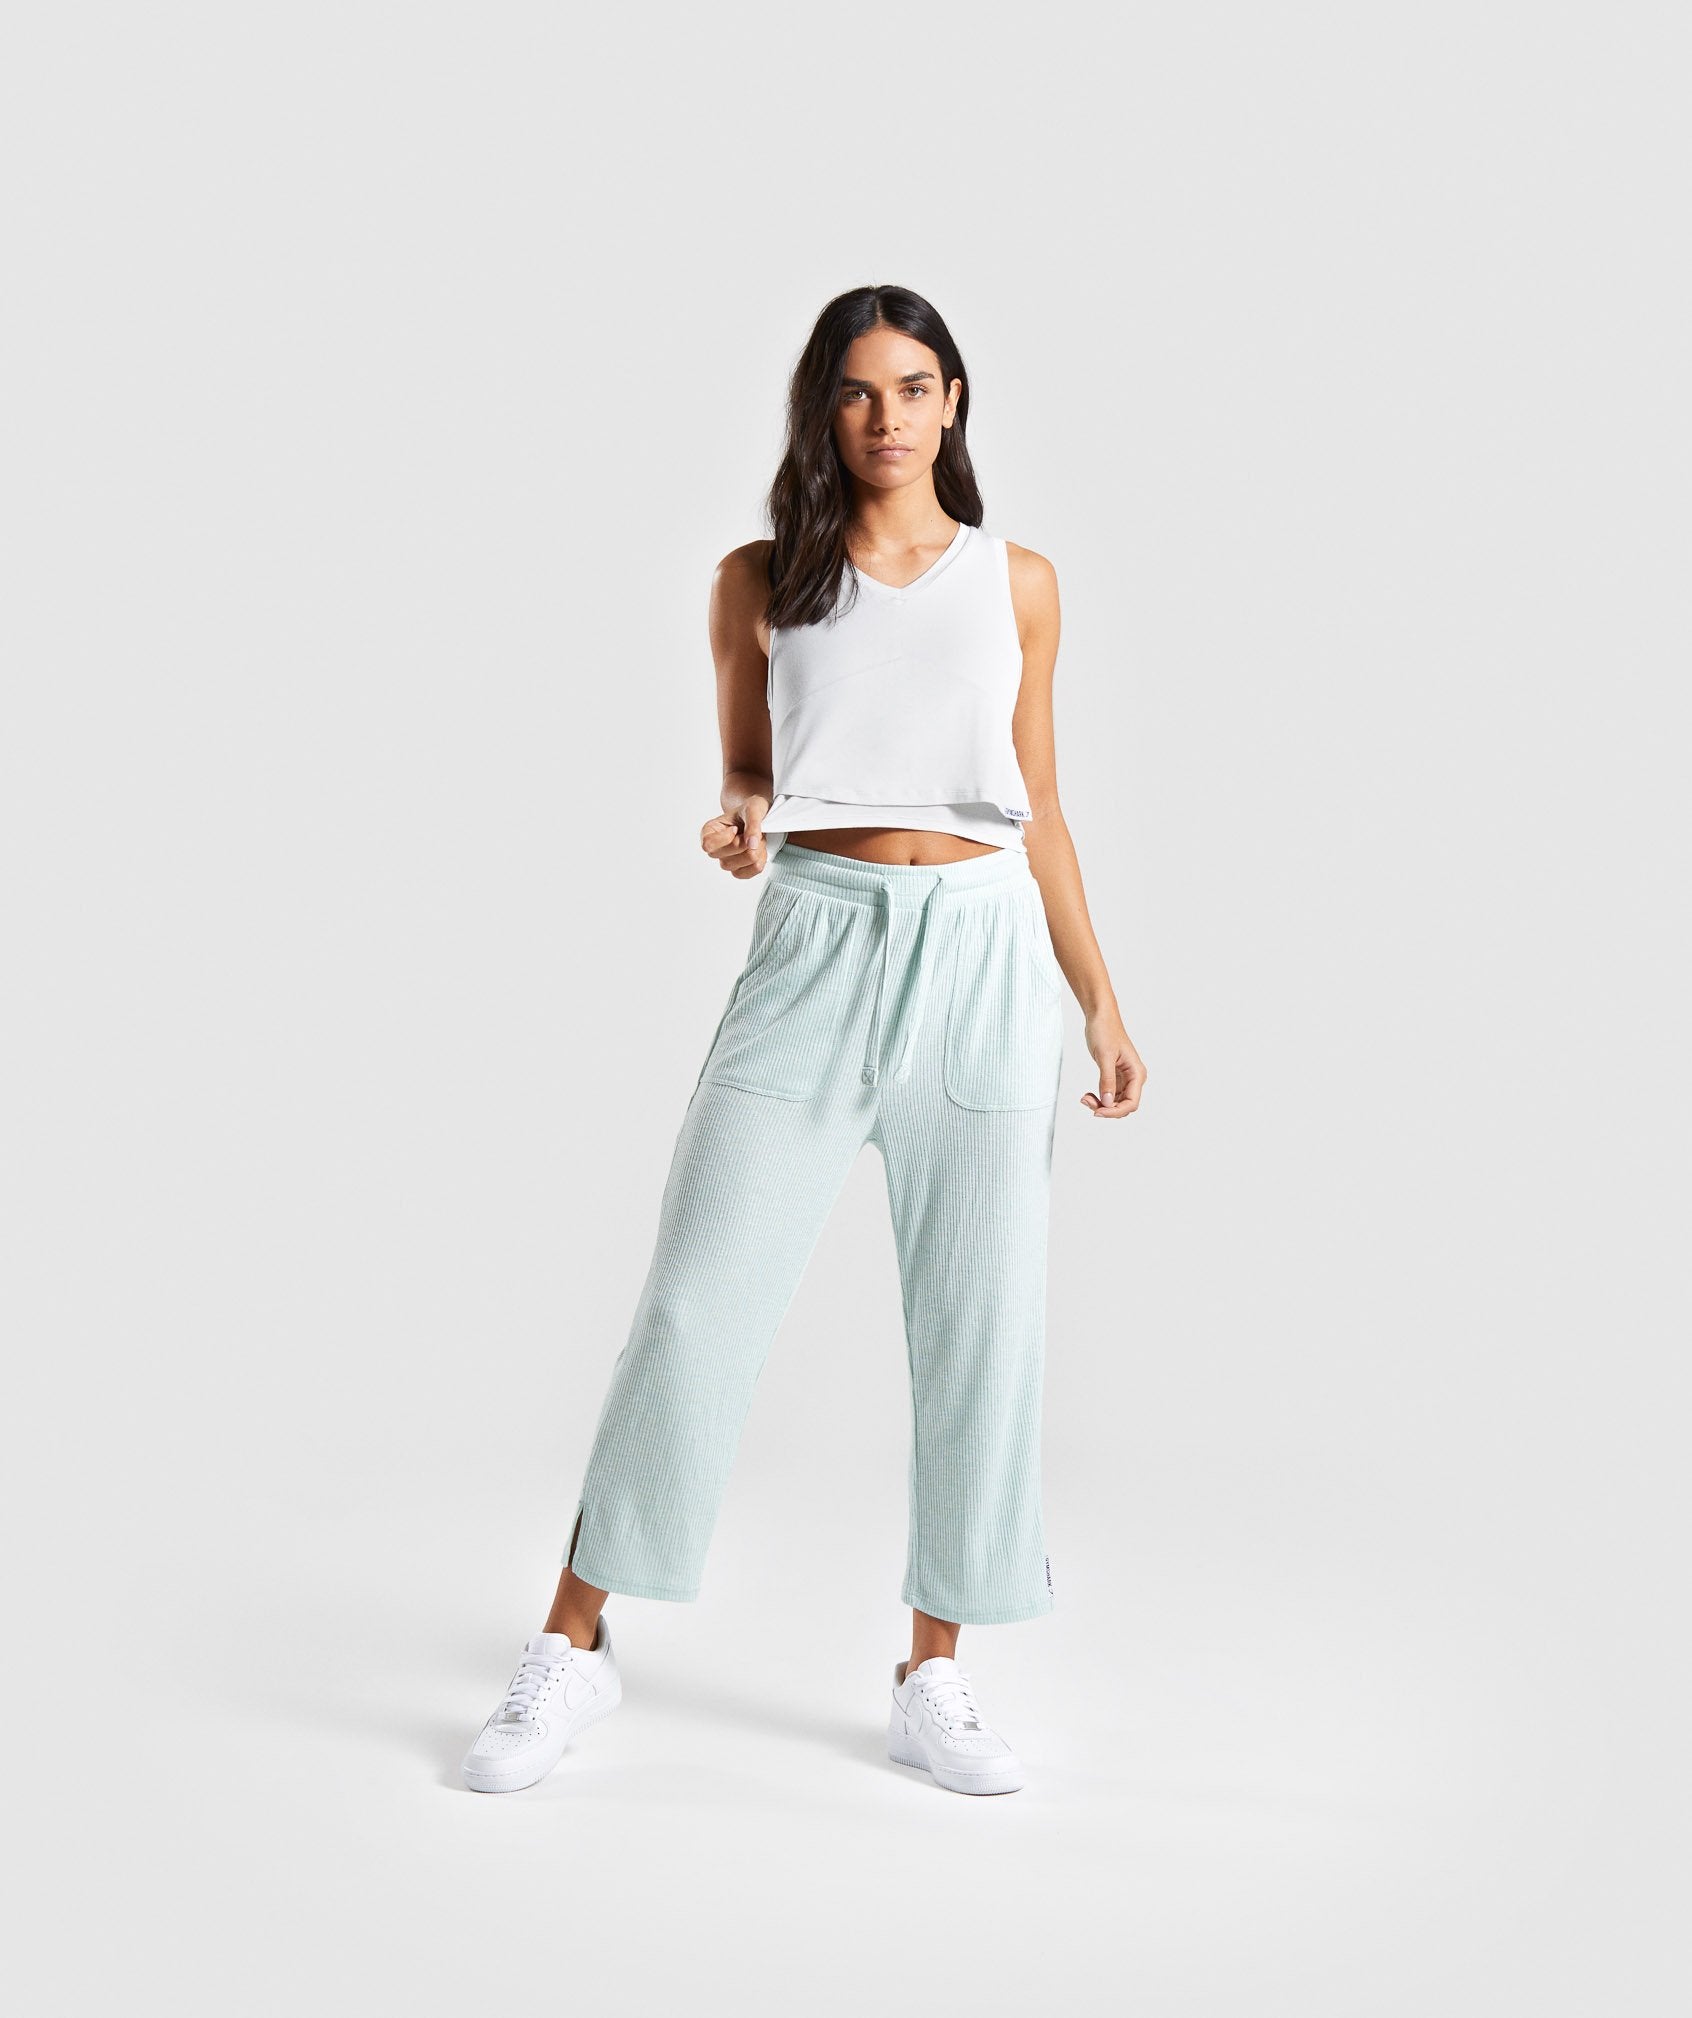 Relaxed Crop Top in Light Grey - view 4